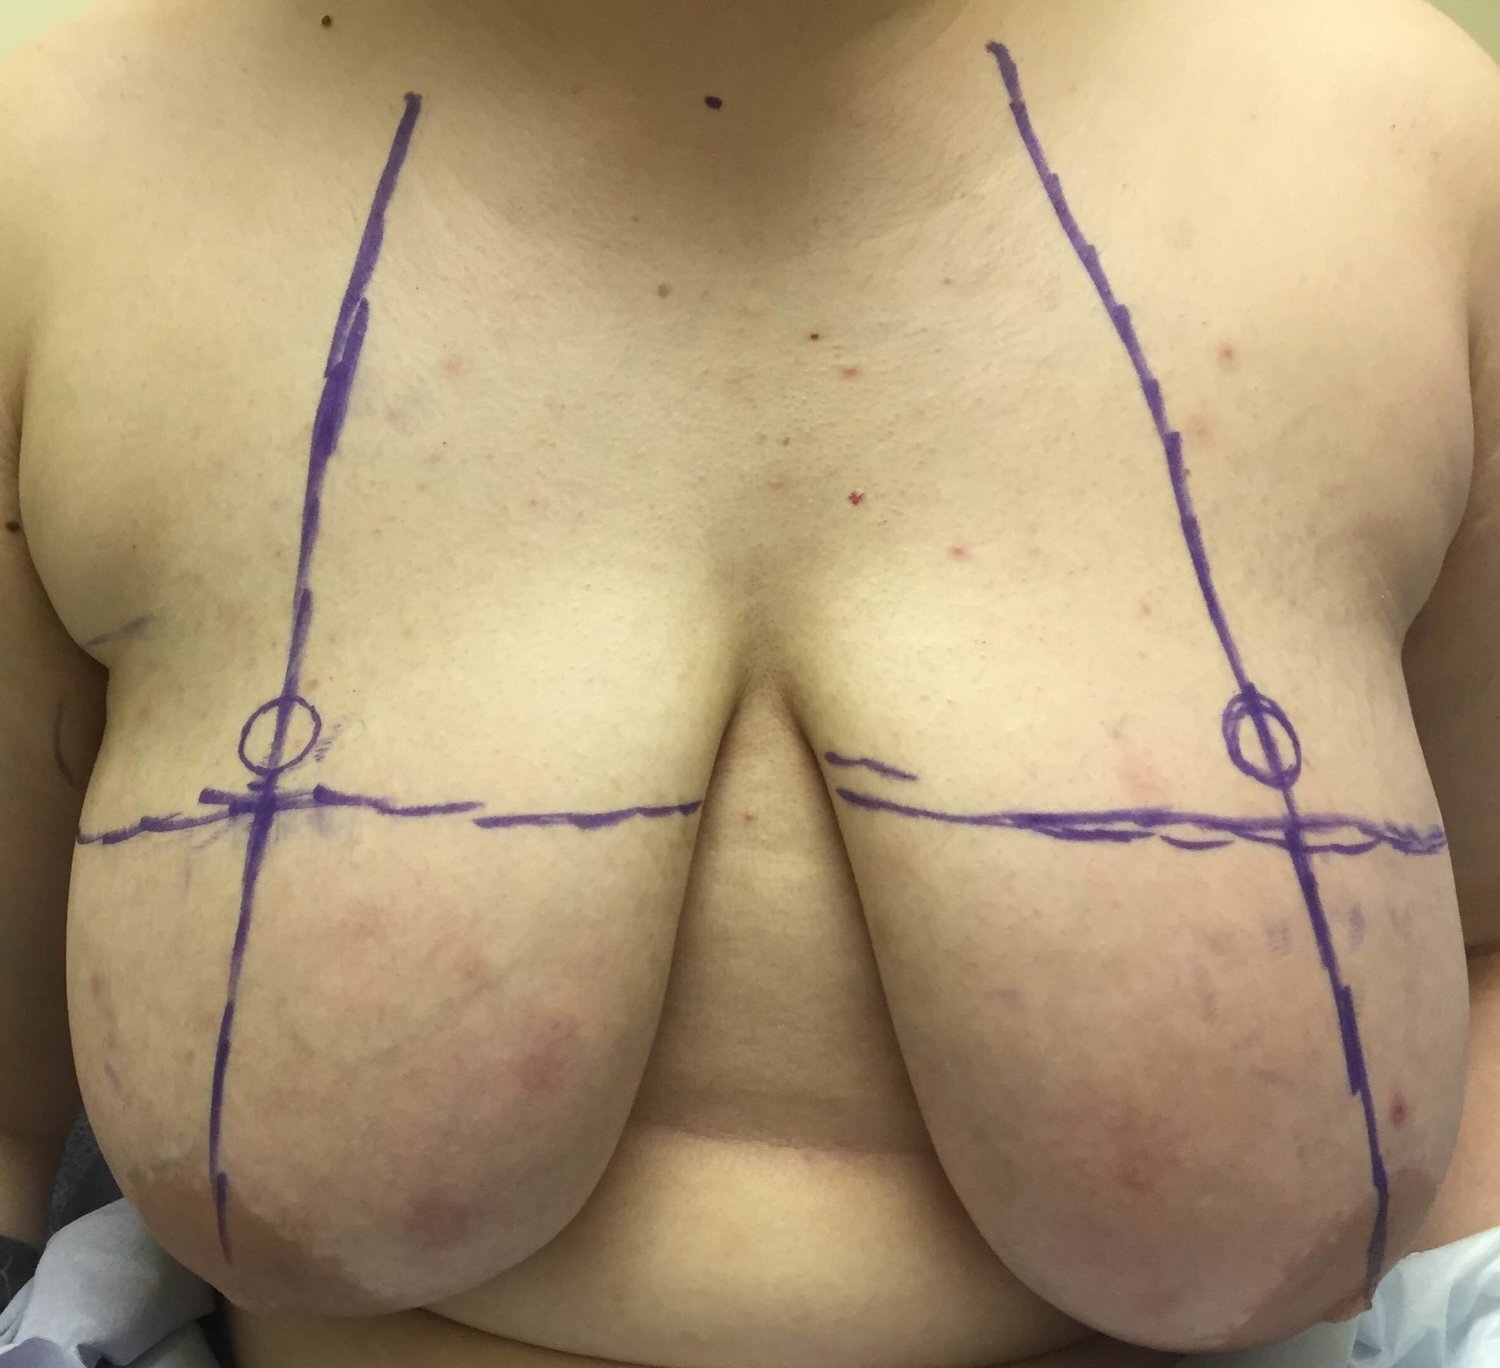 don tully recommends post op shemale pics pic